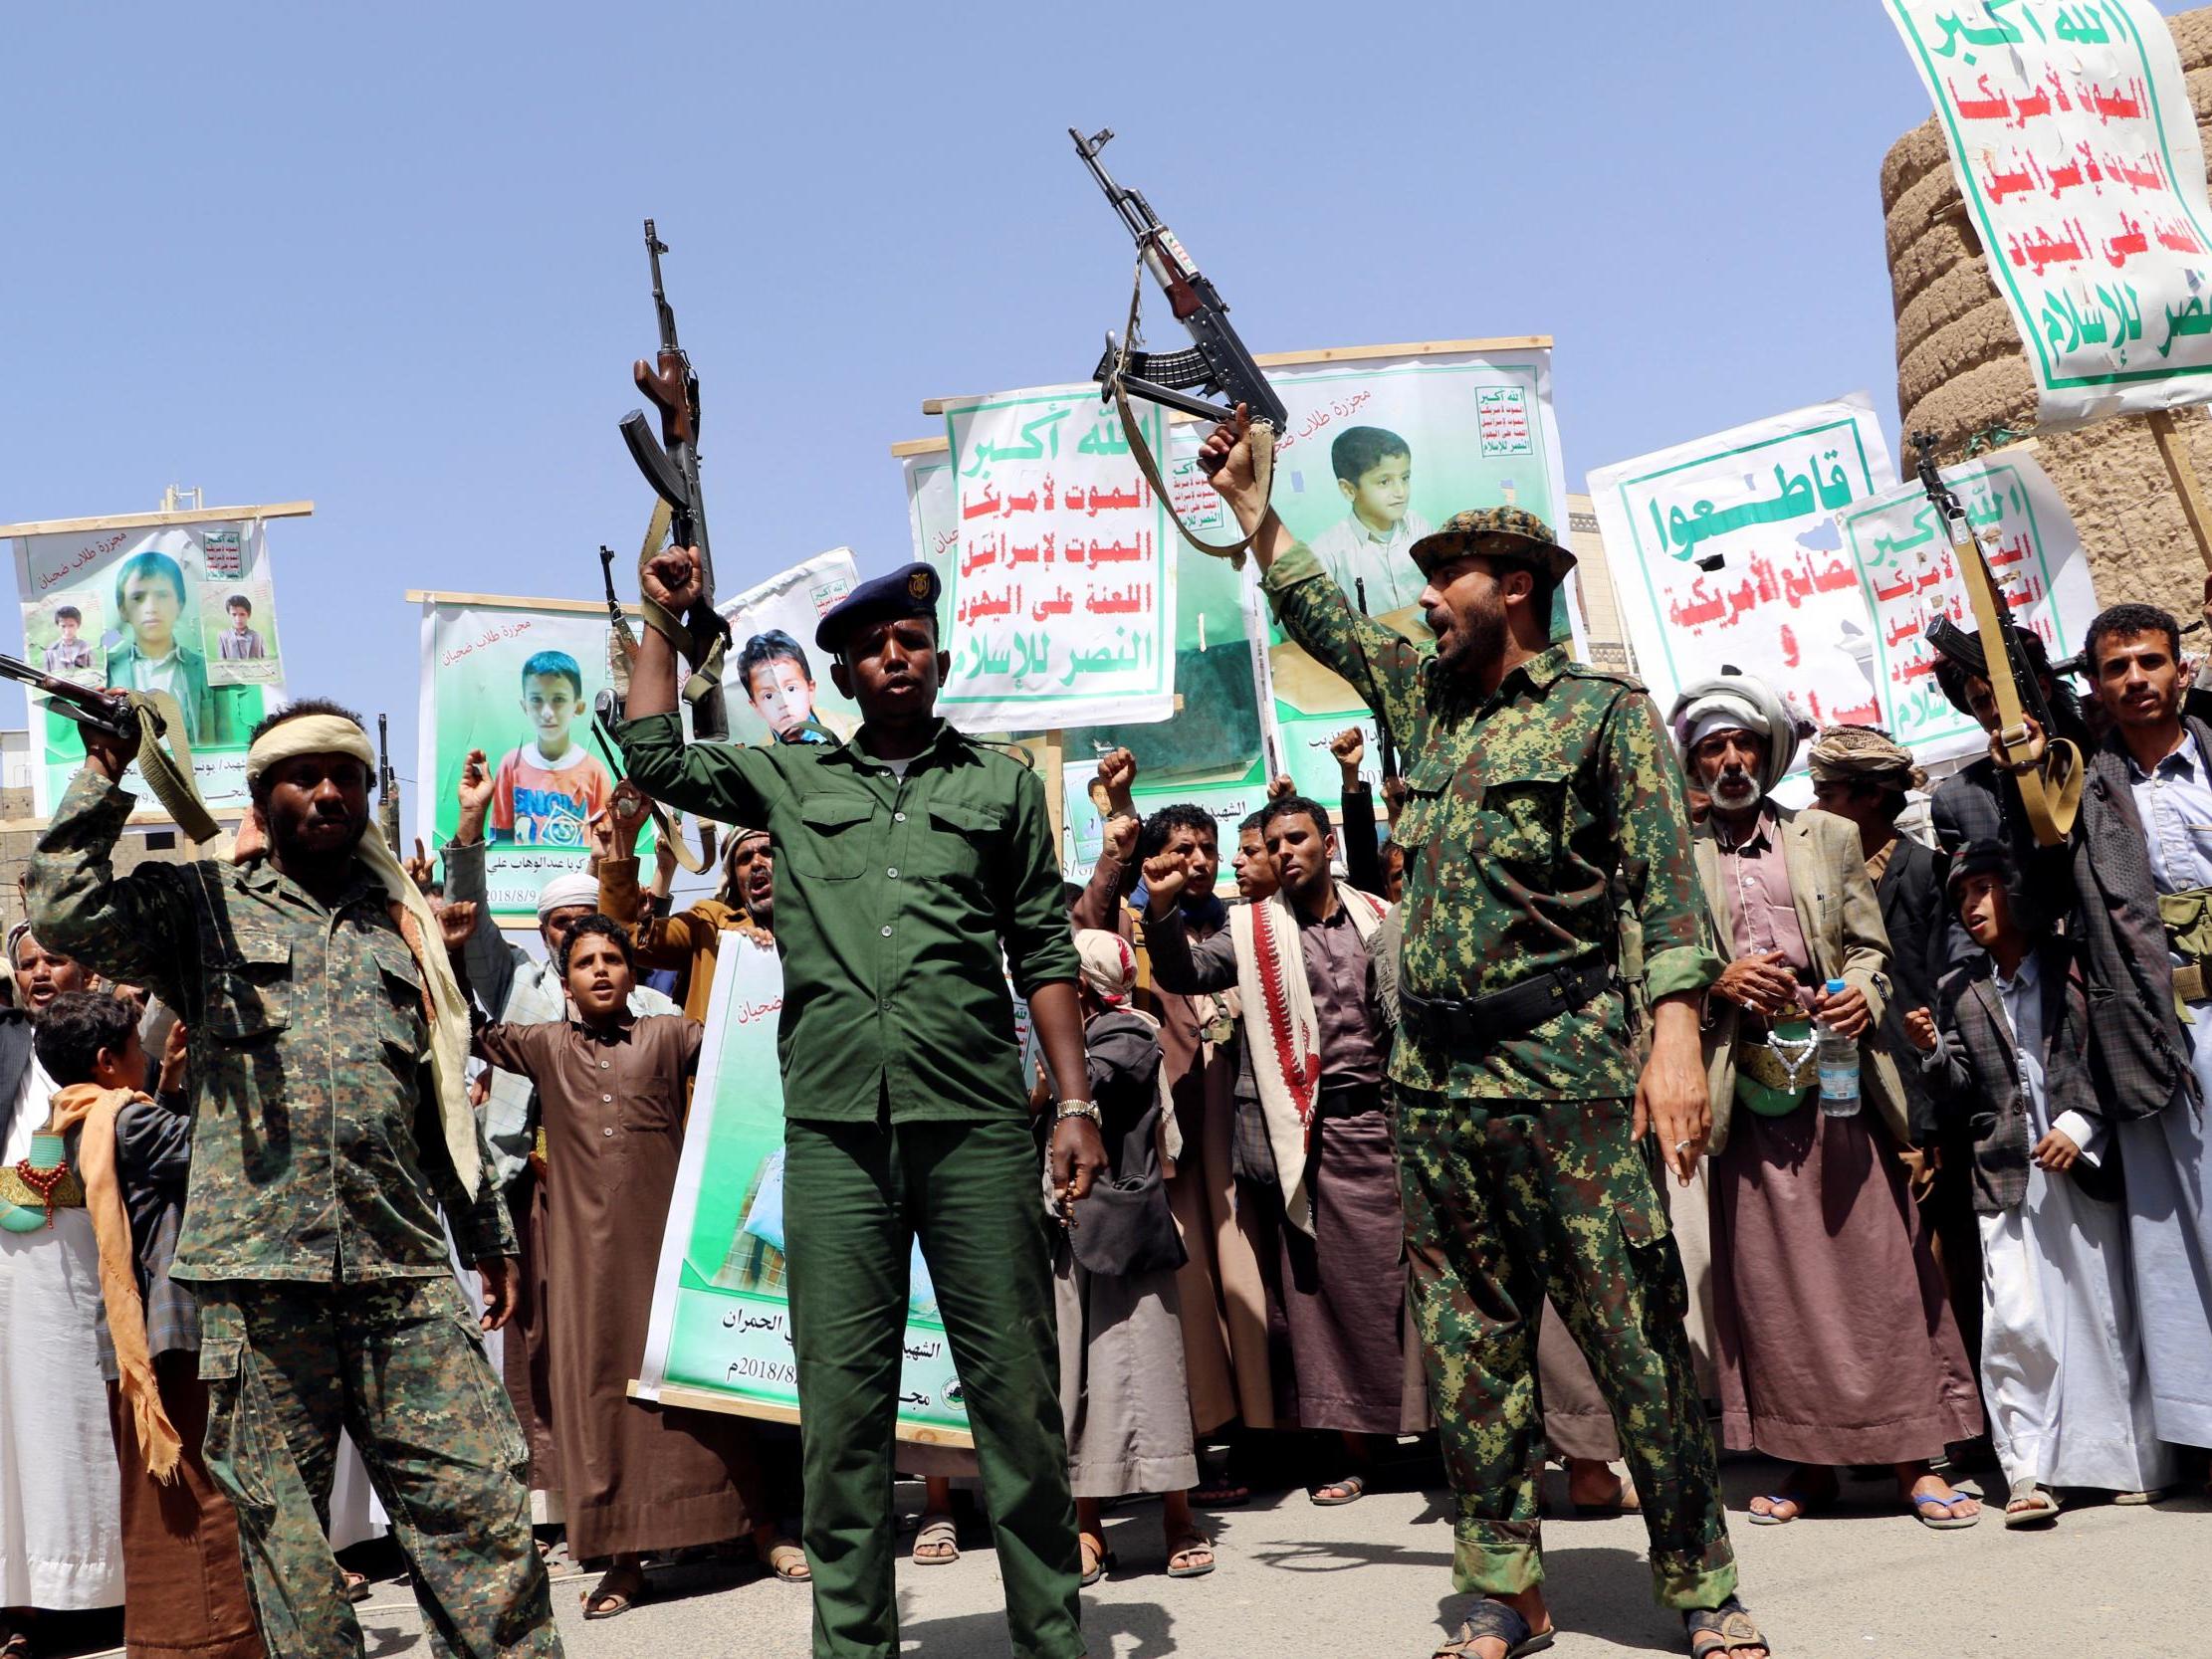 Houthi soldiers protest an offer by the Saudi-led coalition to pay compensation for victims of an airstrike in Saada, Yemen